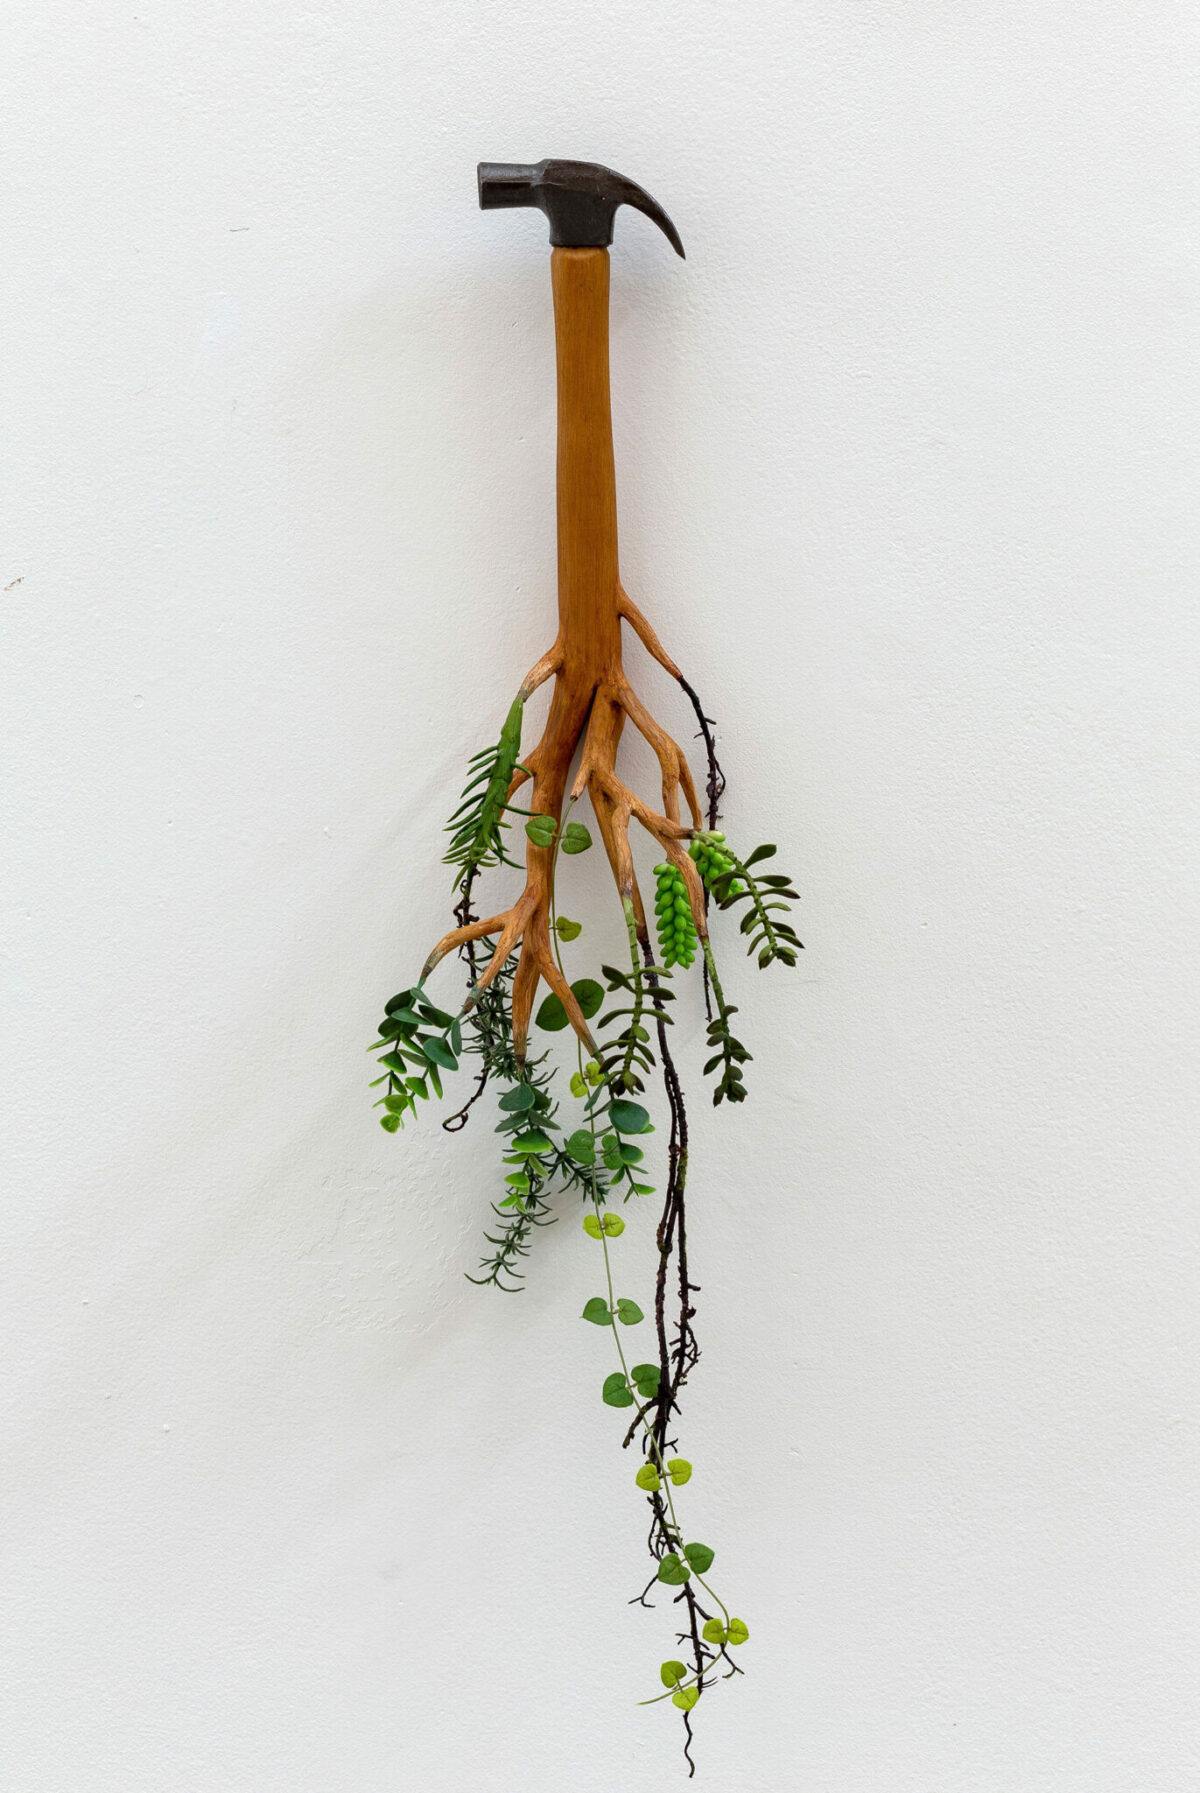 Art And Nature Humorous Wooden Sculptures With Sprouted Wooden Limbs By Camille Kachani 8